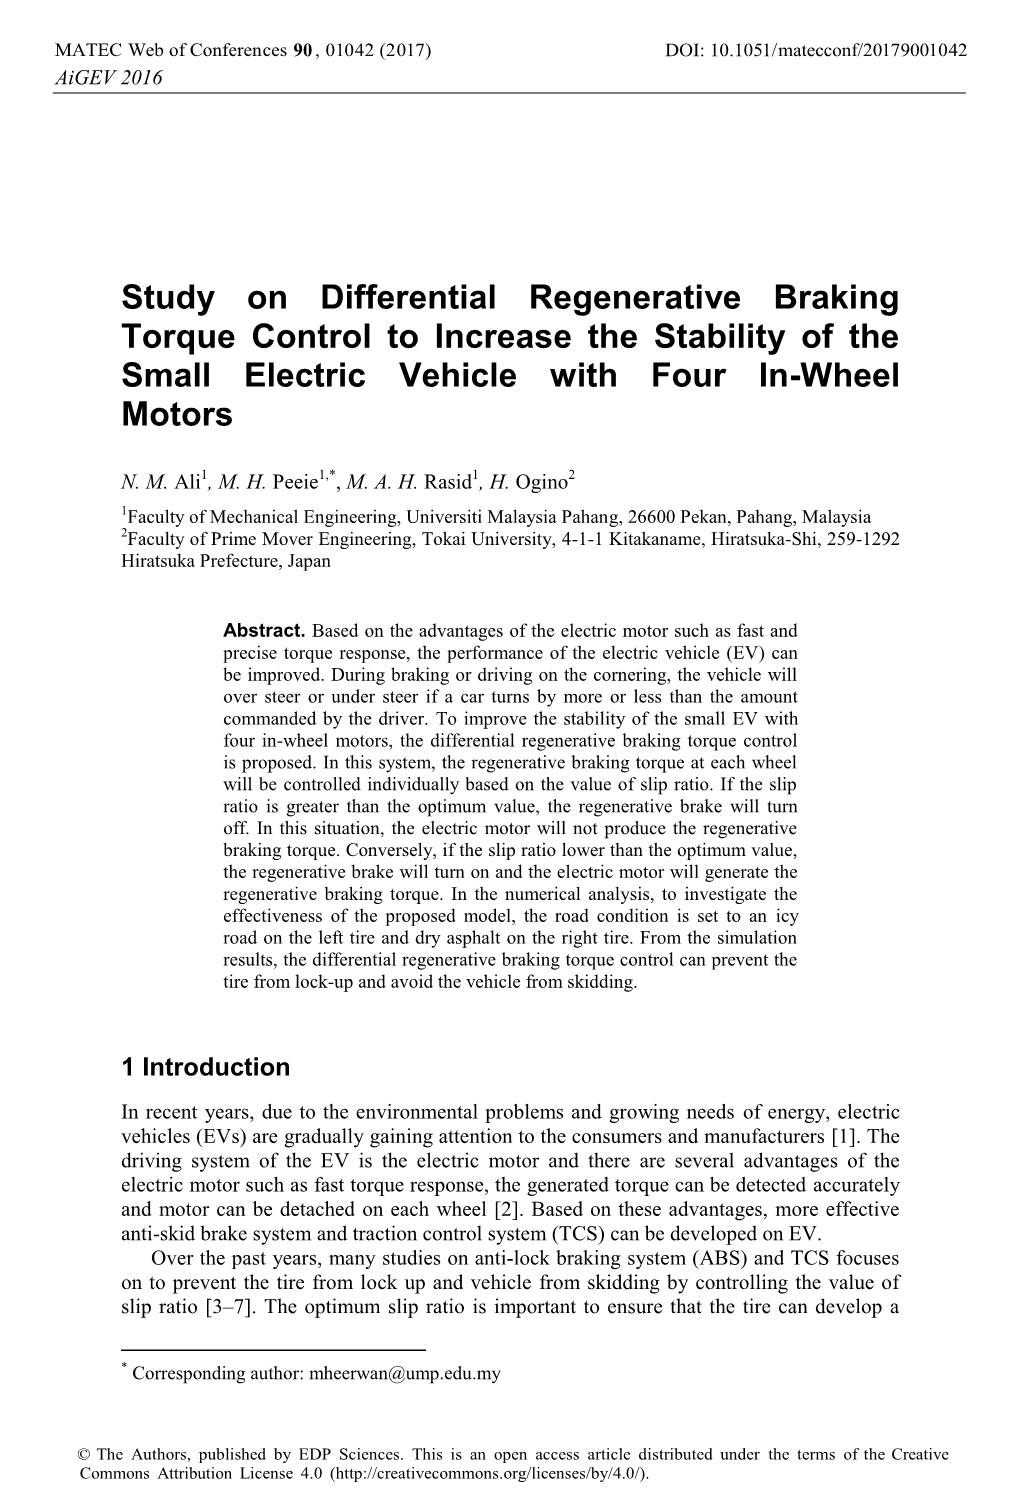 Study on Differential Regenerative Braking Torque Control to Increase the Stability of the Small Electric Vehicle with Four In-Wheel Motors